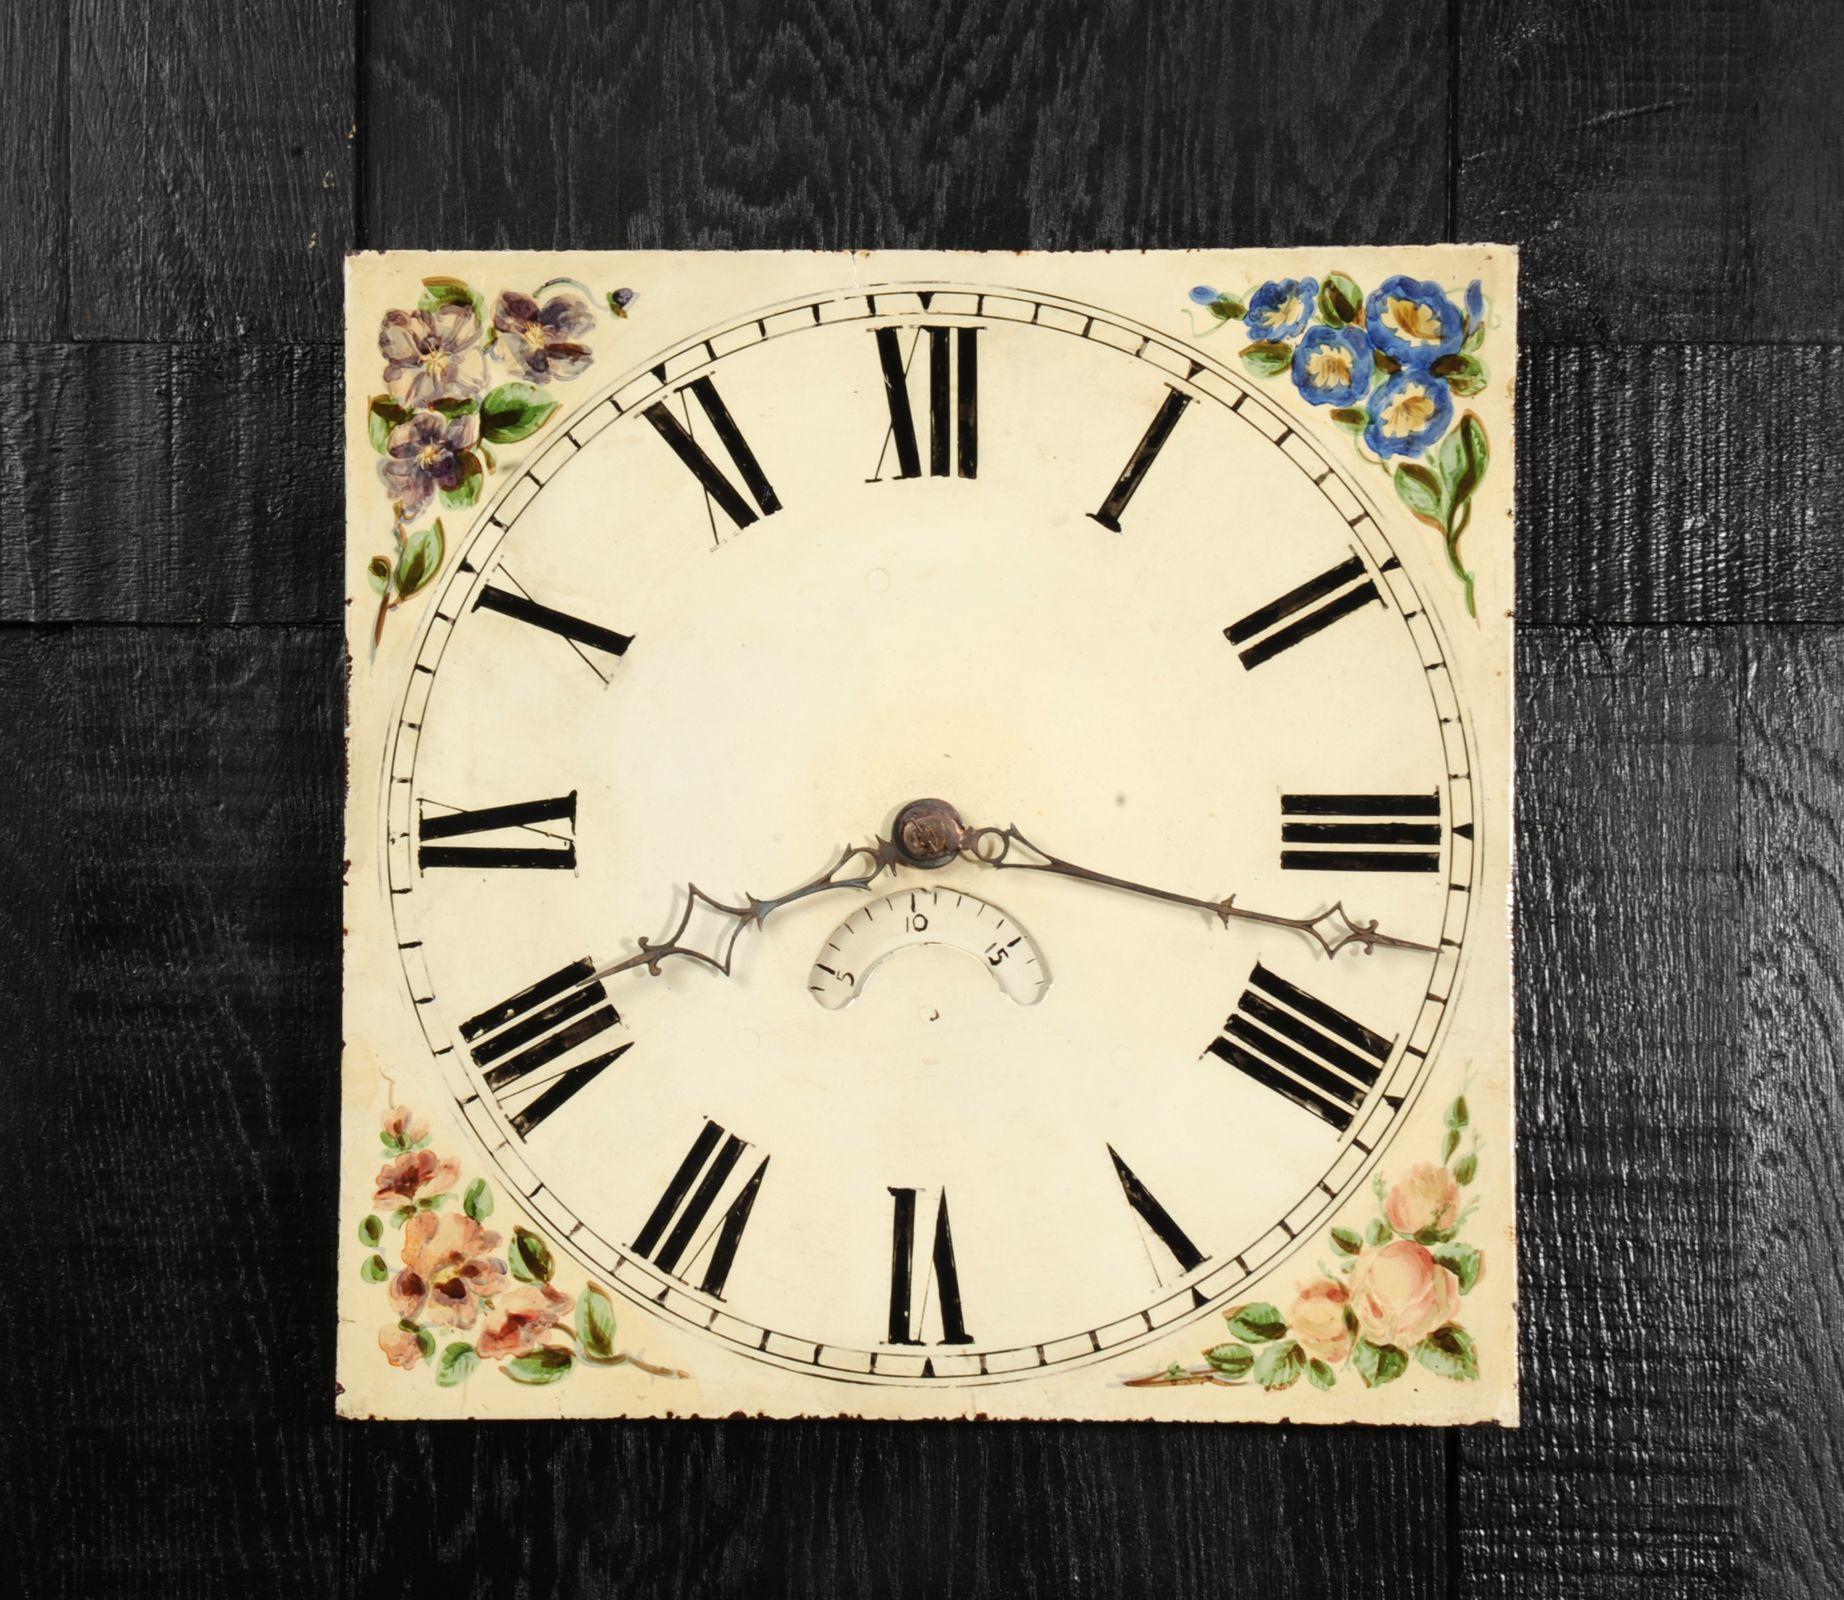 A lovely antique iron English clock dial circa 1840 in its original enamel, charmingly decorated and English country garden flowers. With ancient craquelure, marks of a long life and its original hand cut Iron hands, all as found by our buyer on a